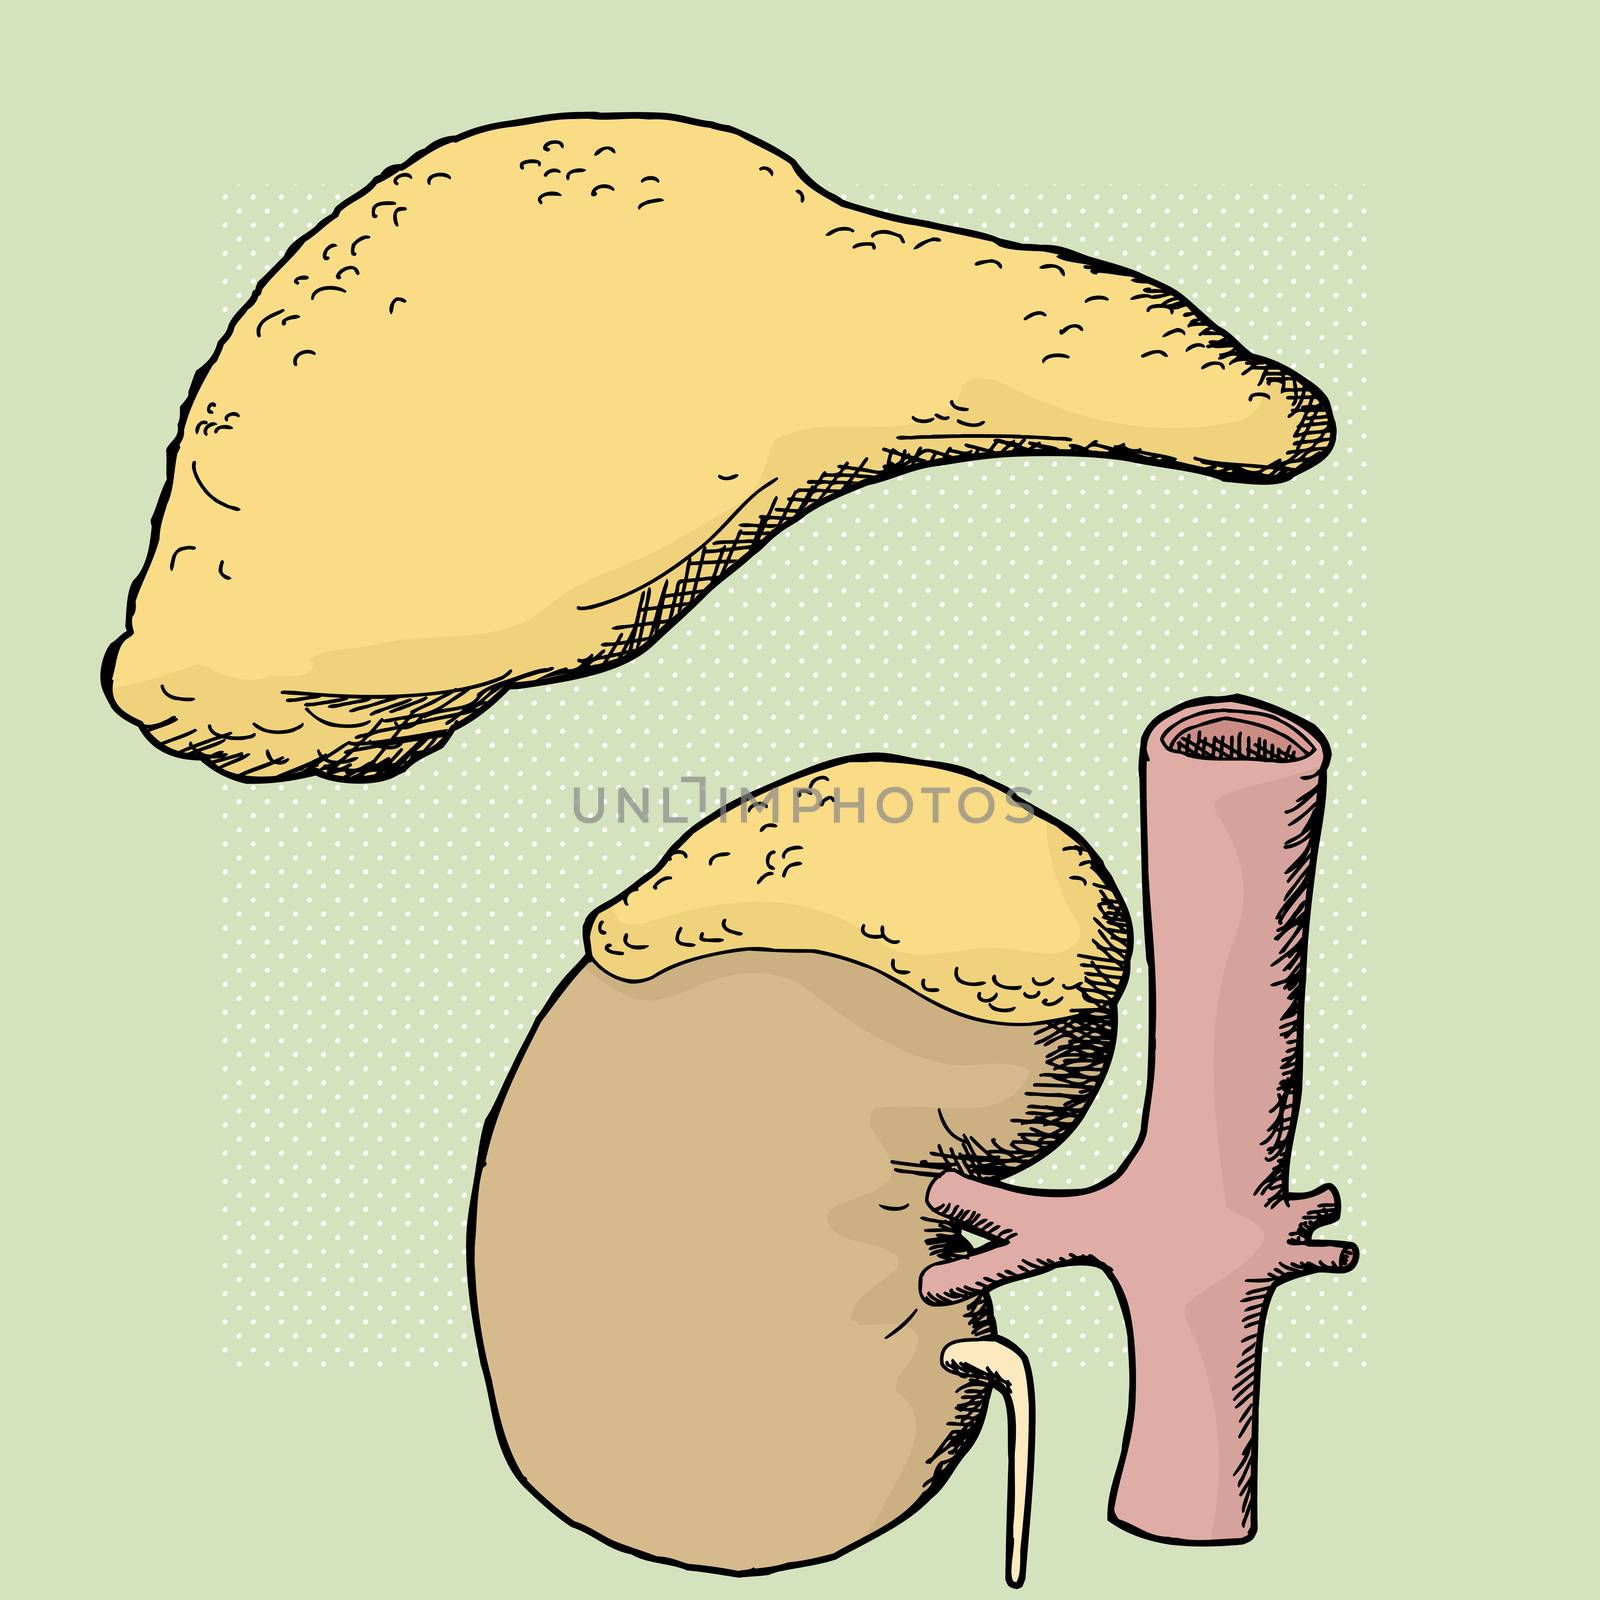 Human adrenal glands and kidney over green background